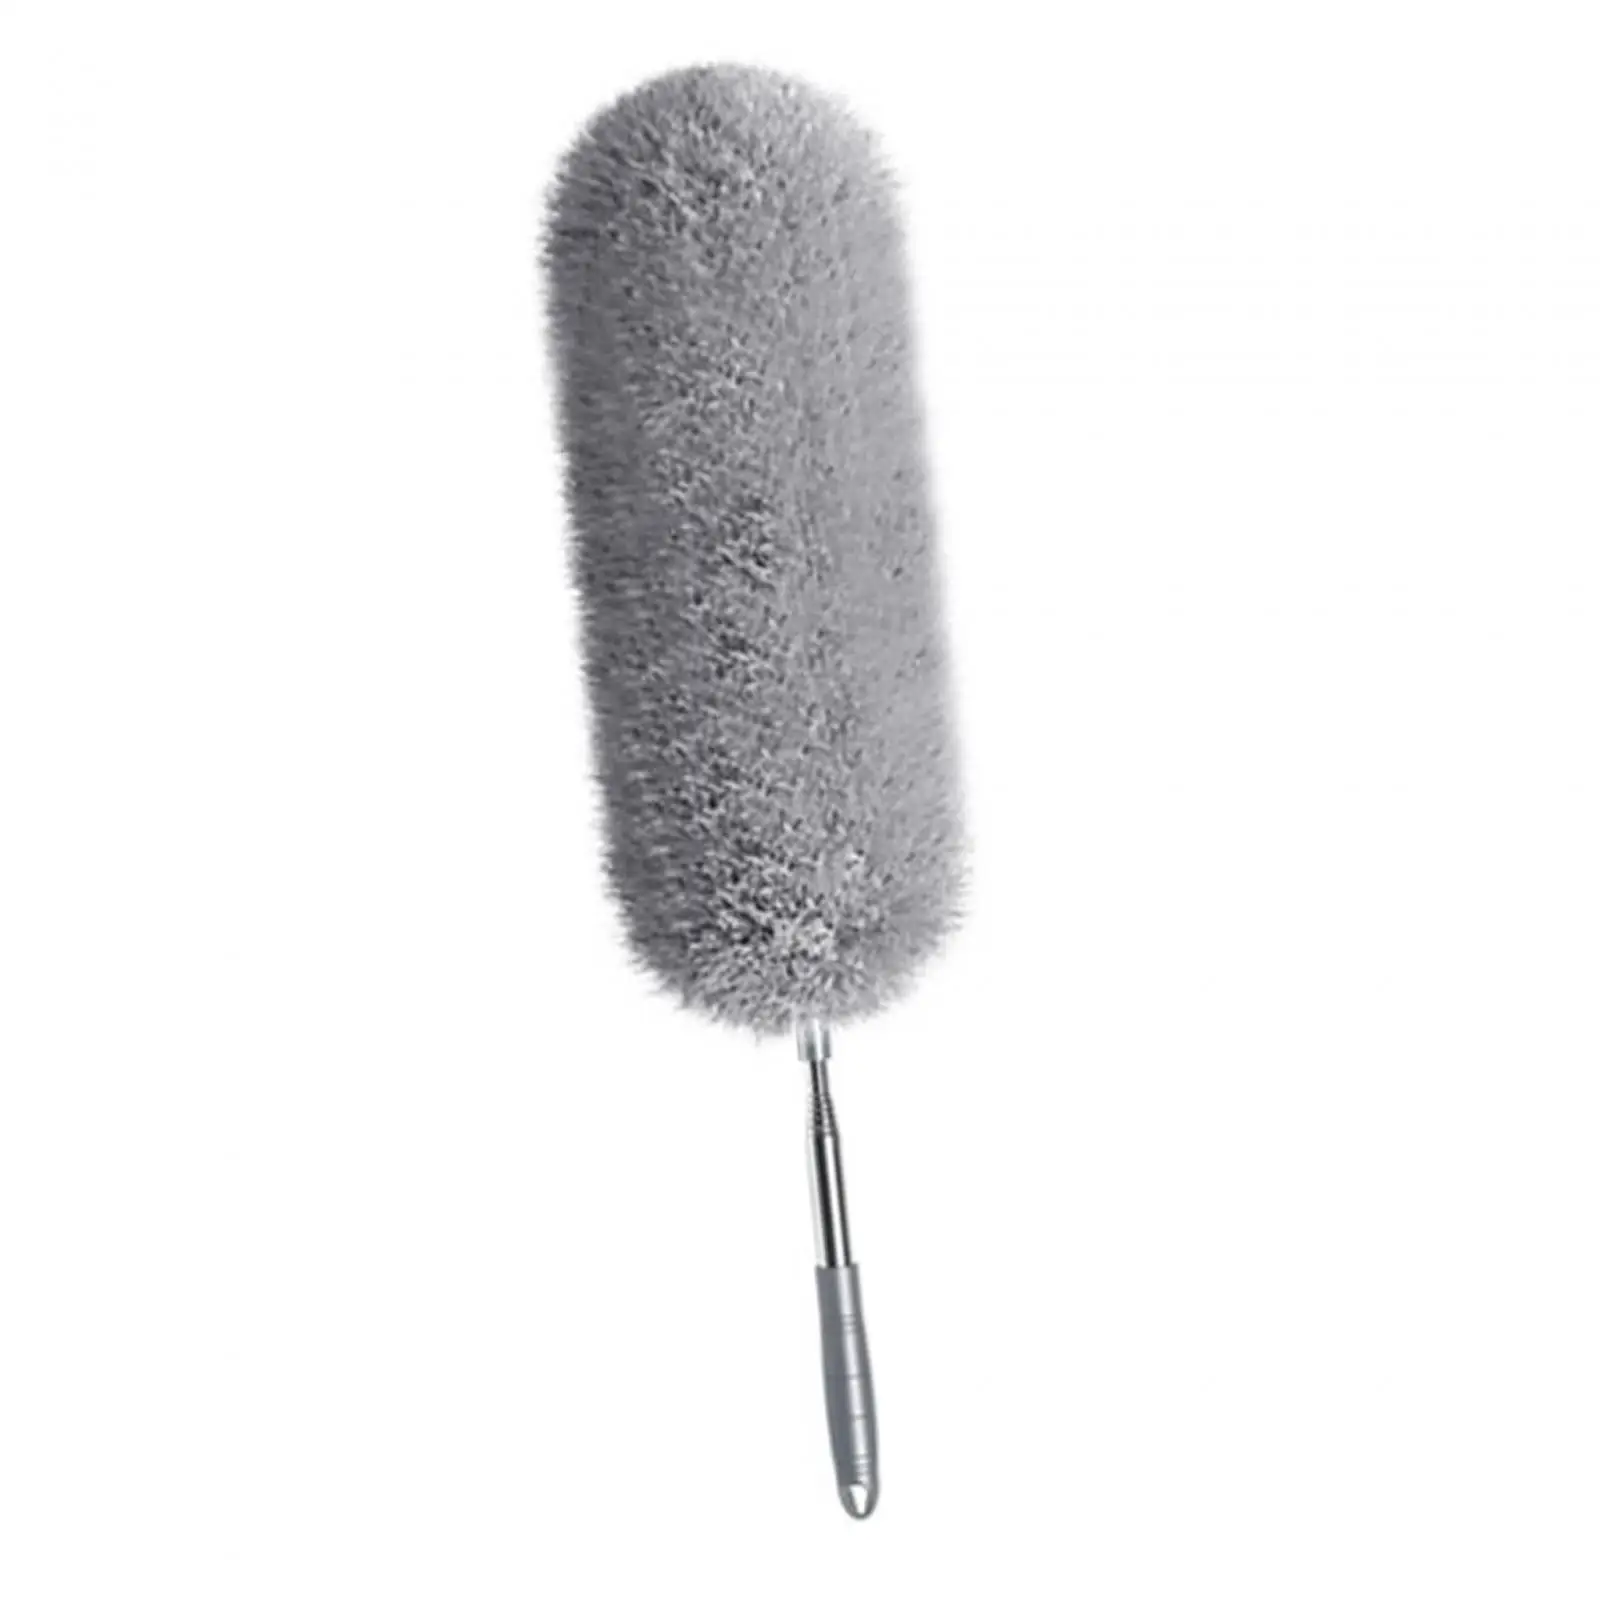 Retractable Duster for Cleaning Washable Extendable Bendable Long Handle Duster for Living Room Home Cleaning Cobweb Desktop